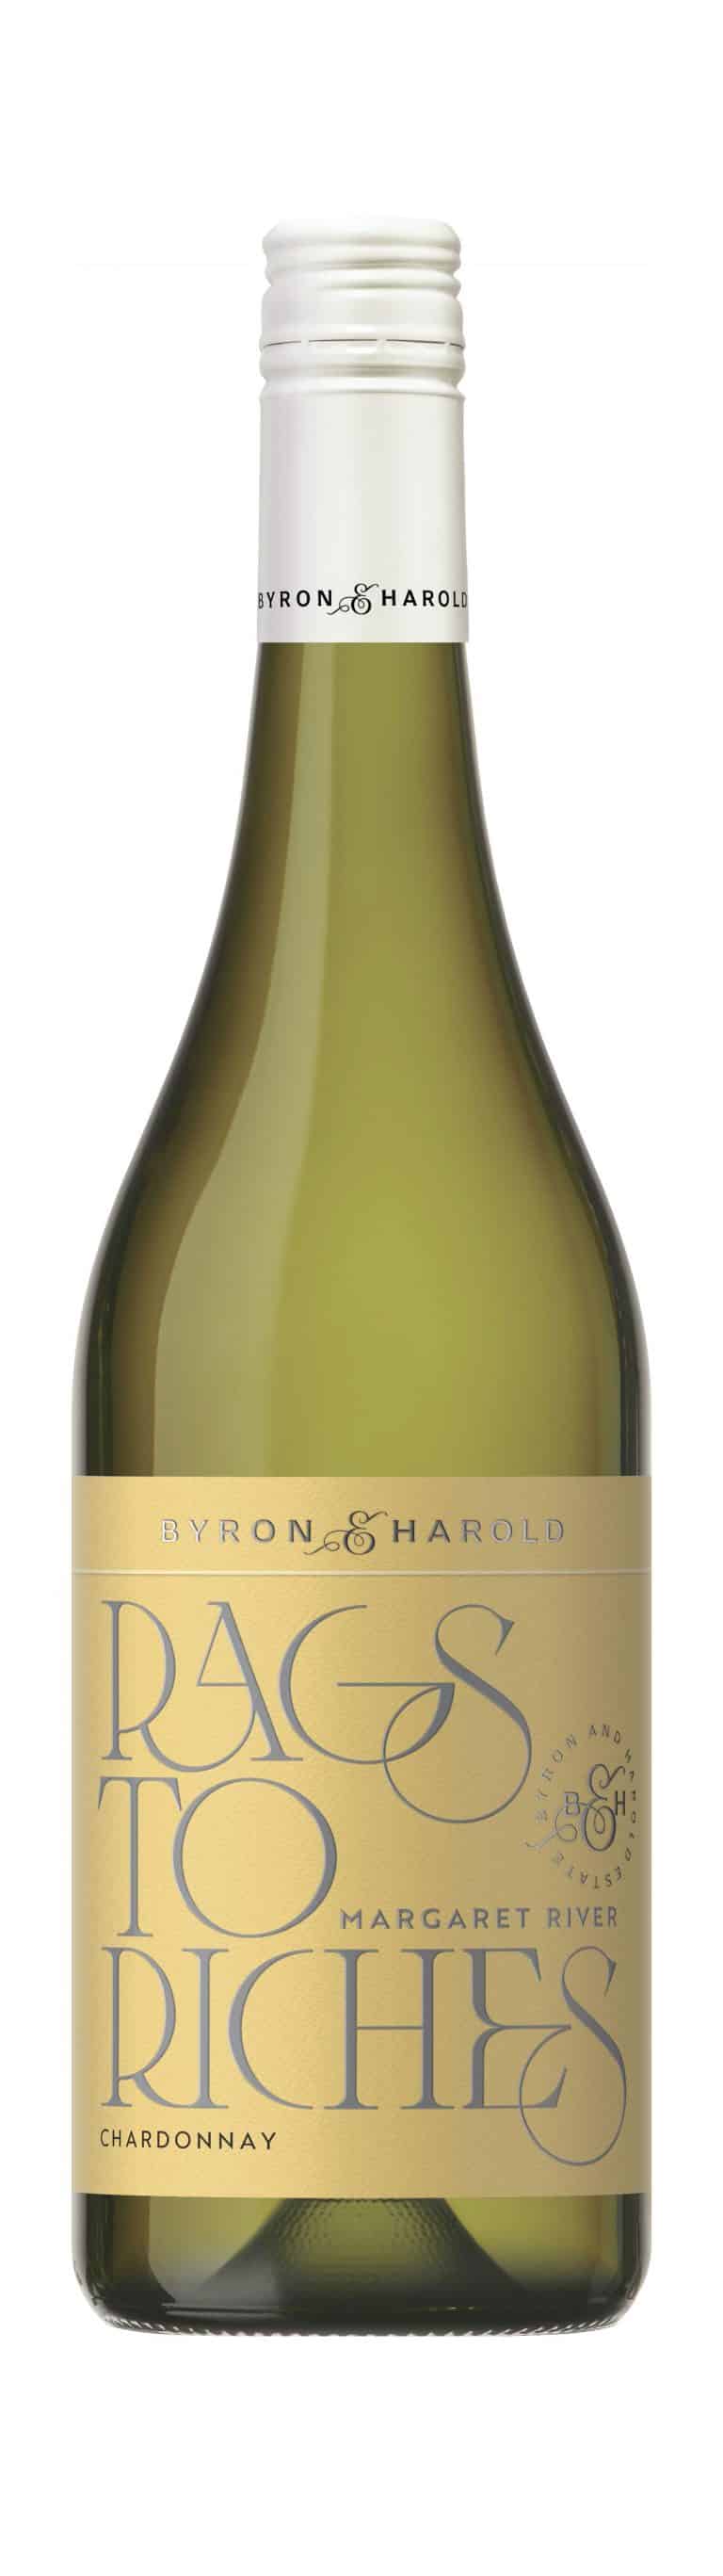 Byron & Harold Rags to Riches Chardonnay